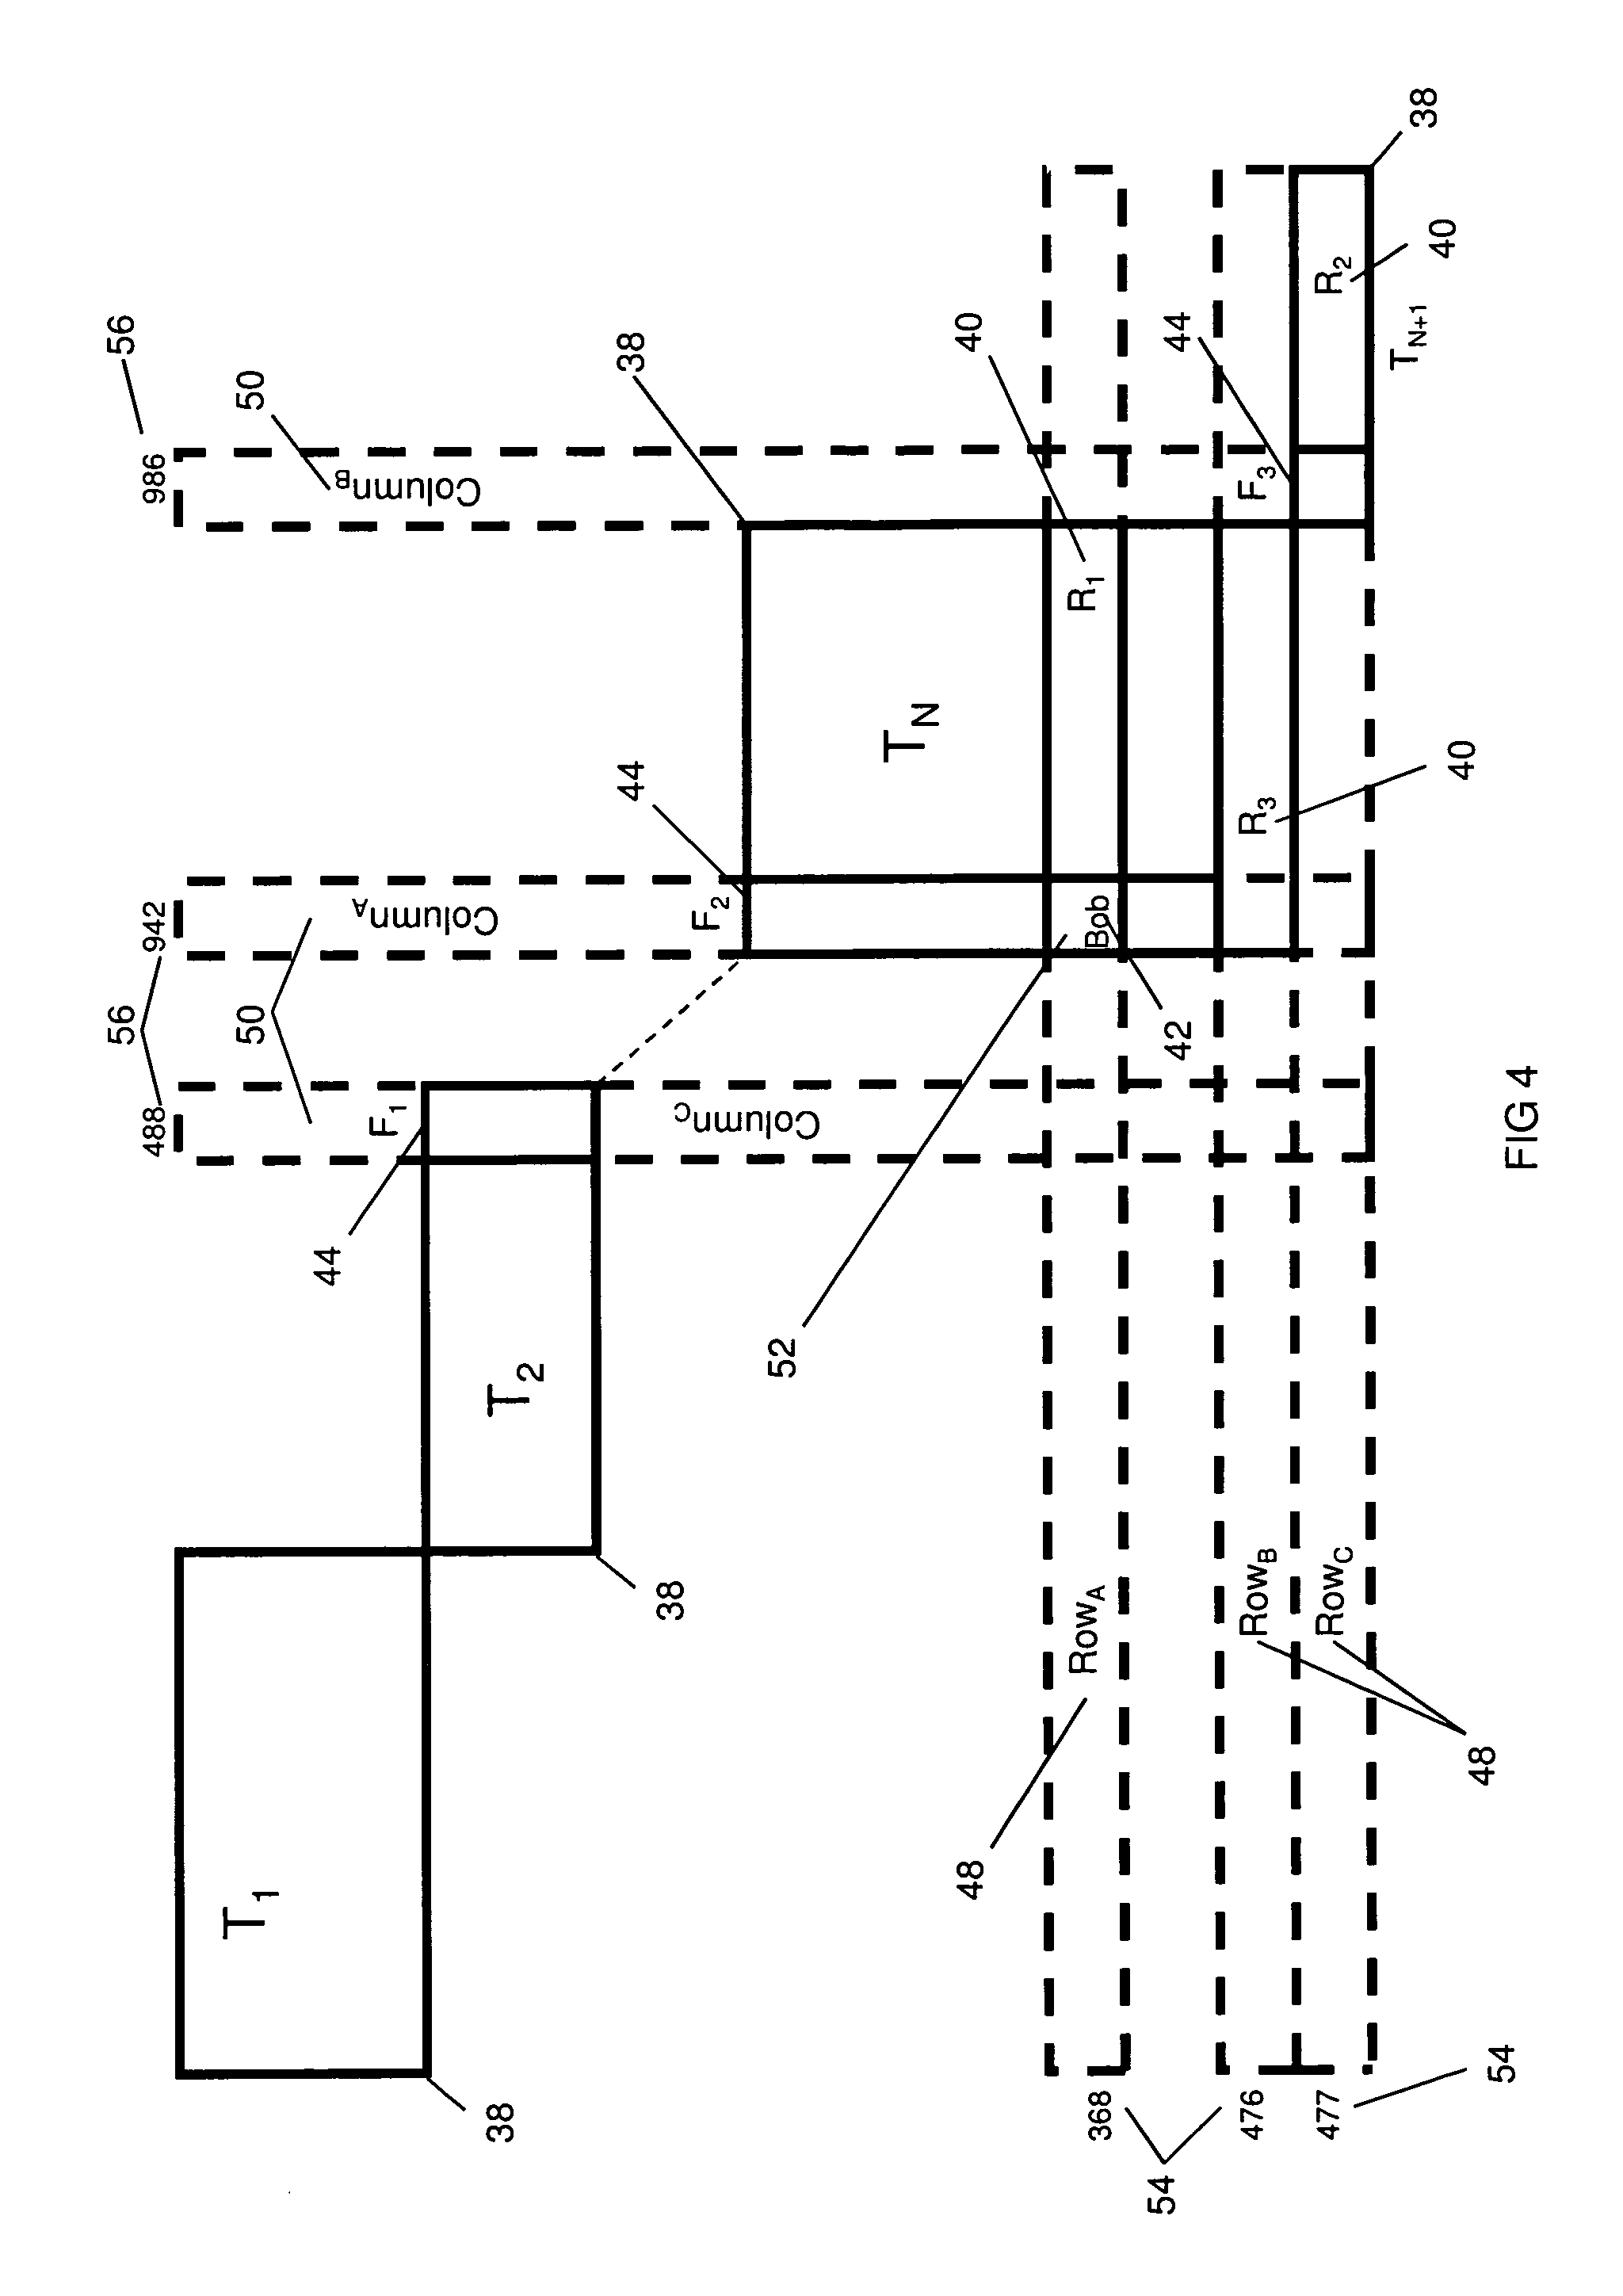 Two-dimensional data storage system